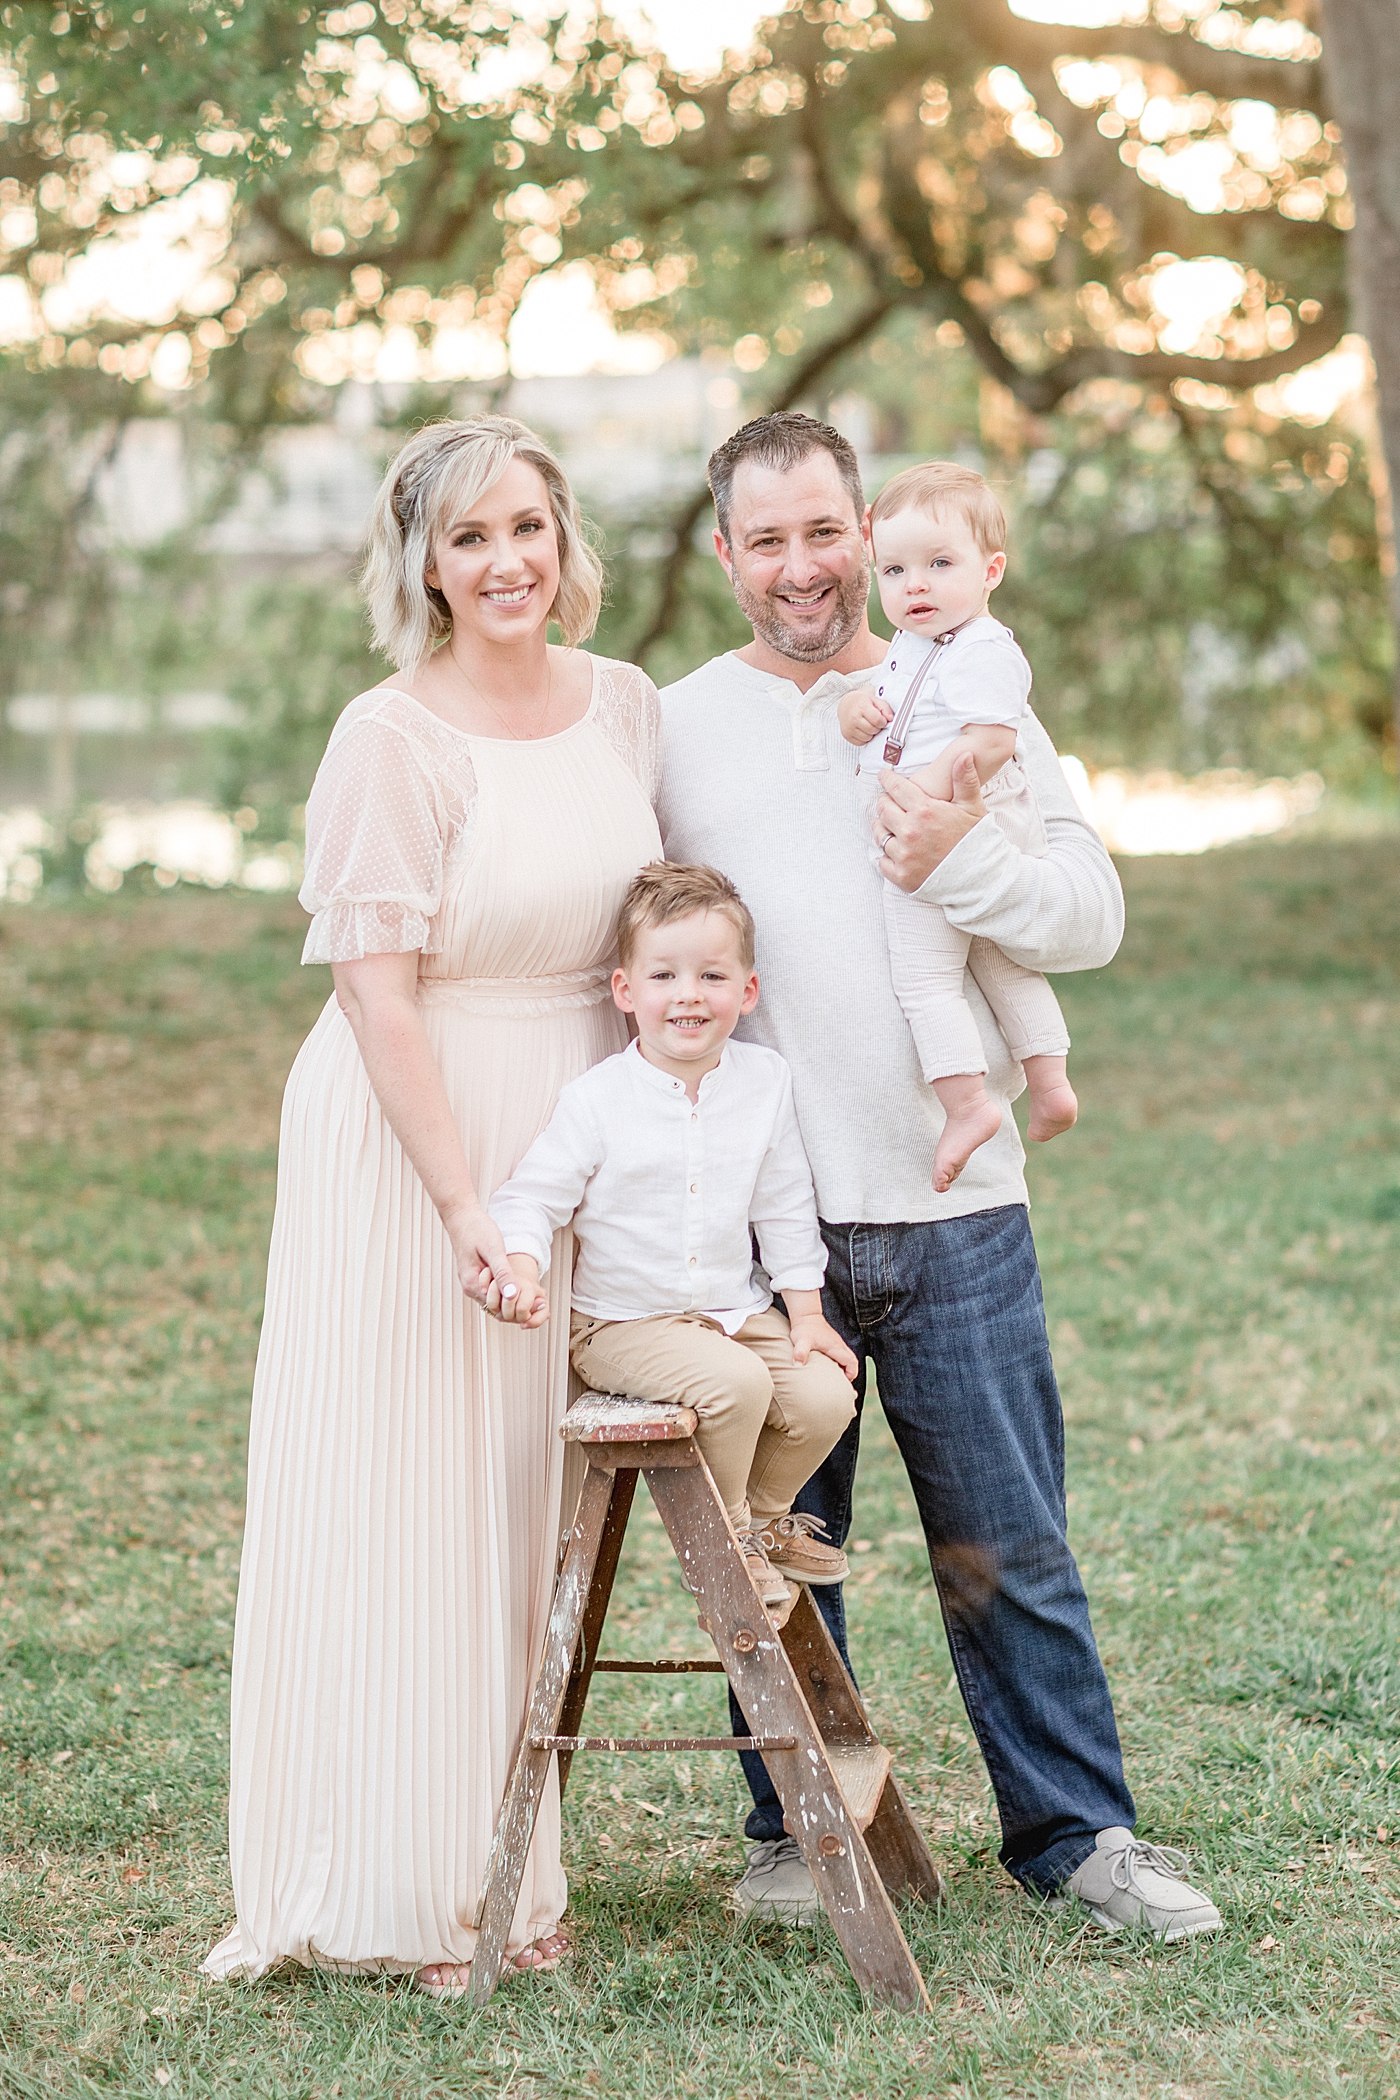 Outdoor family portrait at sunset with Brittany Elise Photography in Tampa, Fl. 